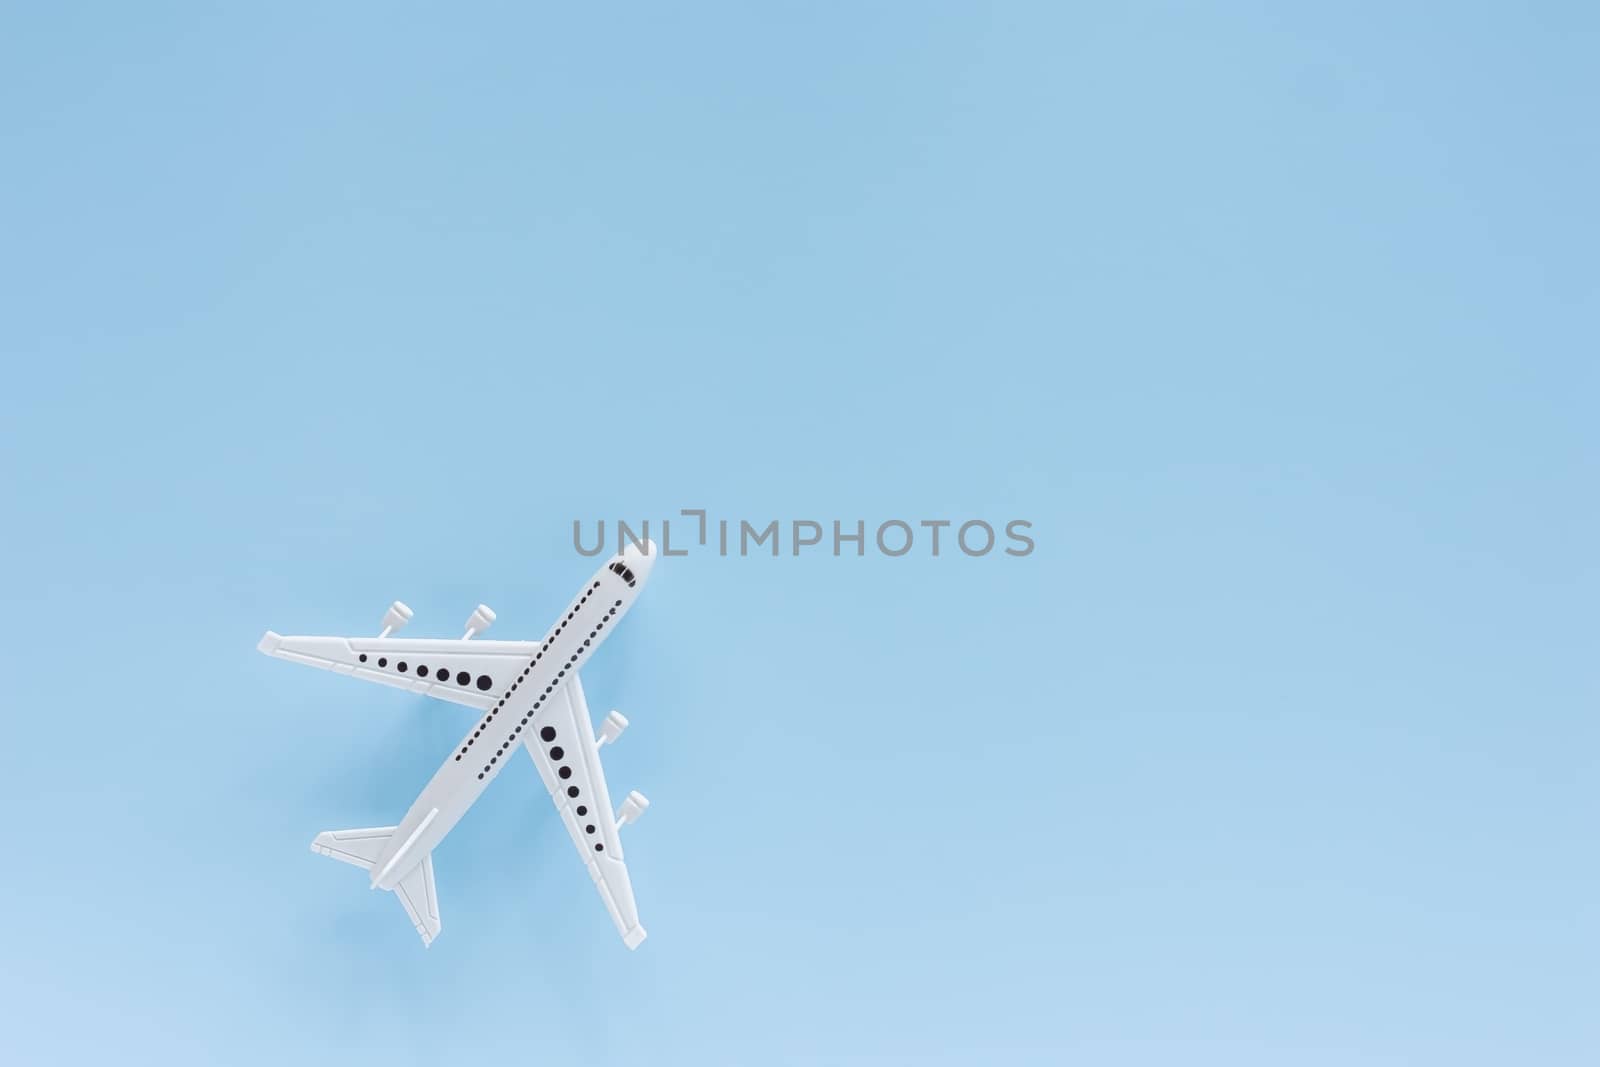 White airplane model on blue background for vehicle and transportation concept